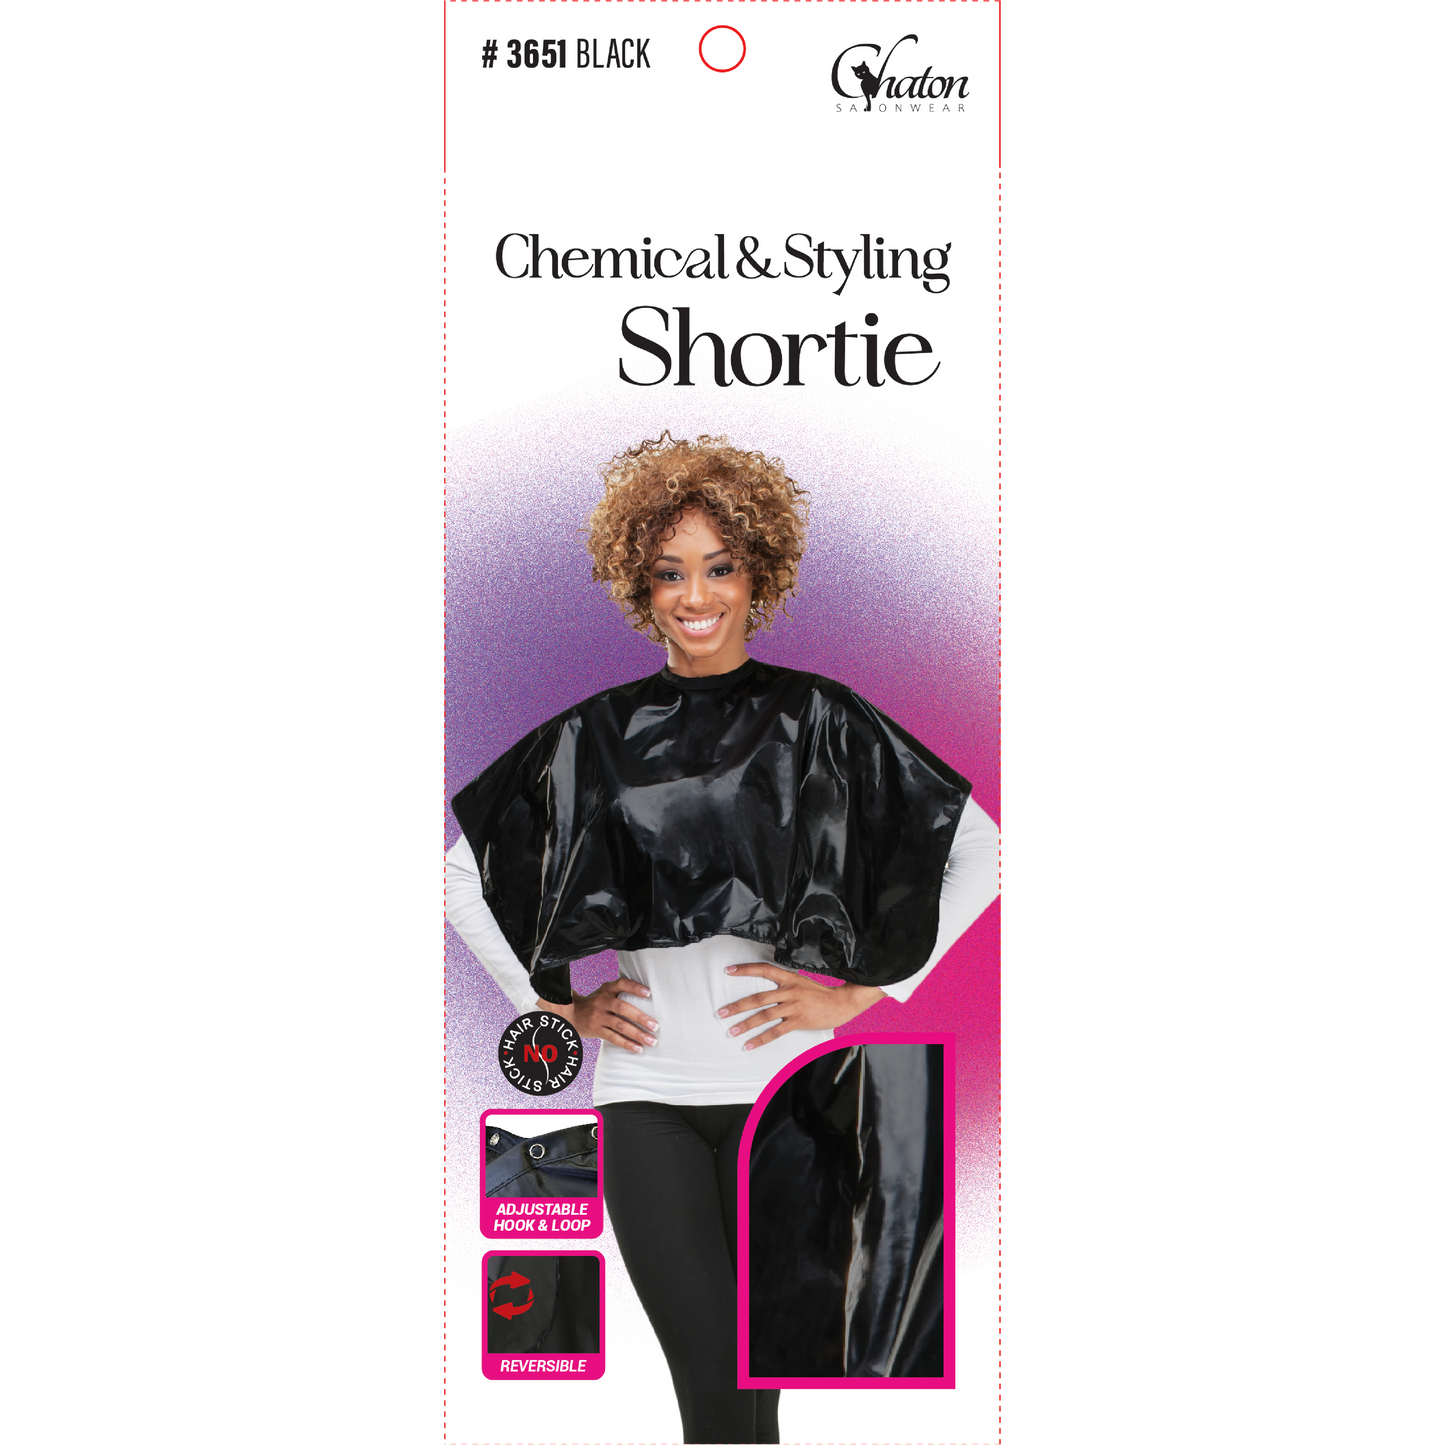 CHEMICAL & STYLING SHORTIE